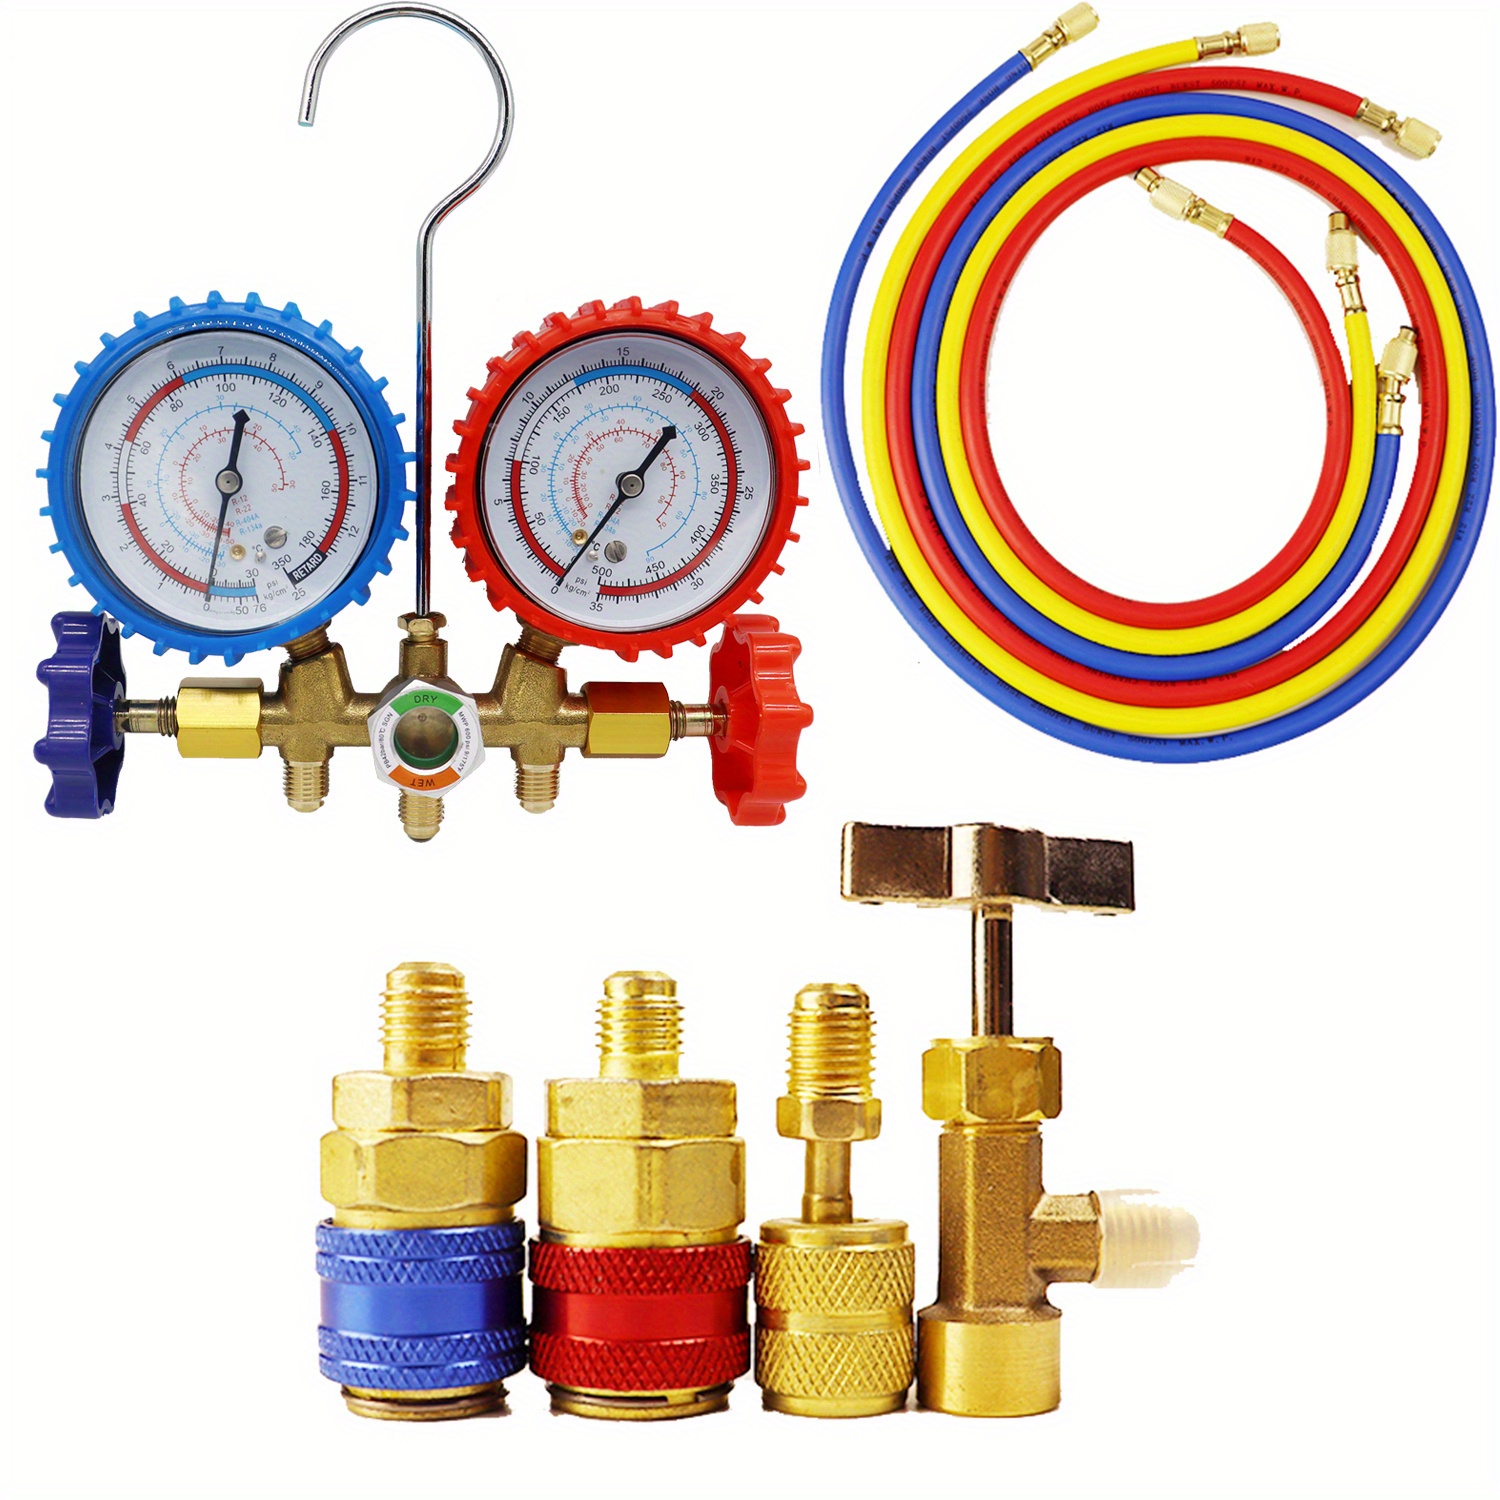 3 Way Ac Manifold Gauge Set Hvac Diagnostic Refrigerant Charging Tool Auto  Household R404a R134a R12 R22 Refrigerant Quick Couplers Valve Core  Accessories Kit, Free Shipping, Free Returns